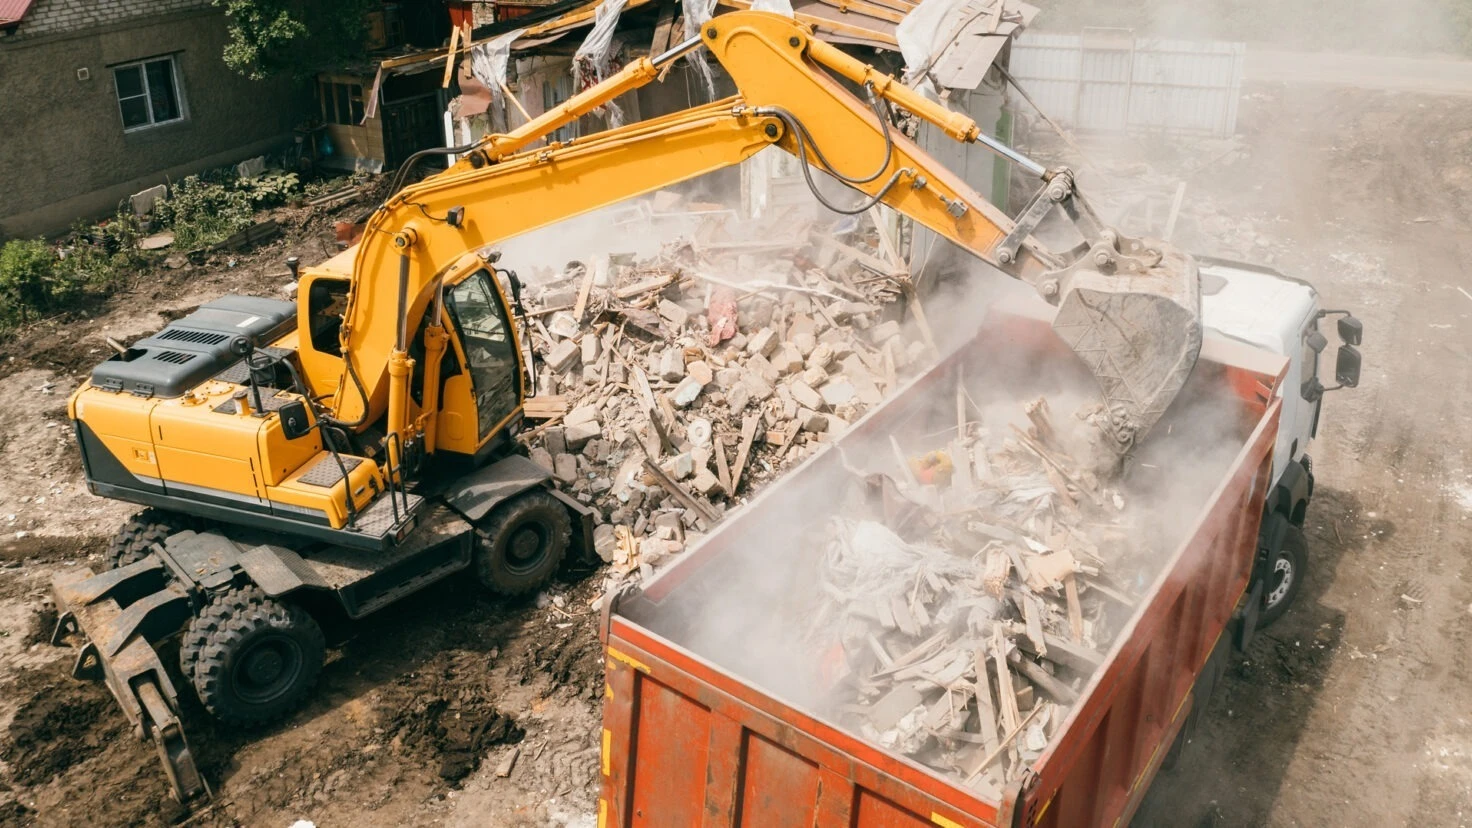 Many technologies exist to help combat construction waste